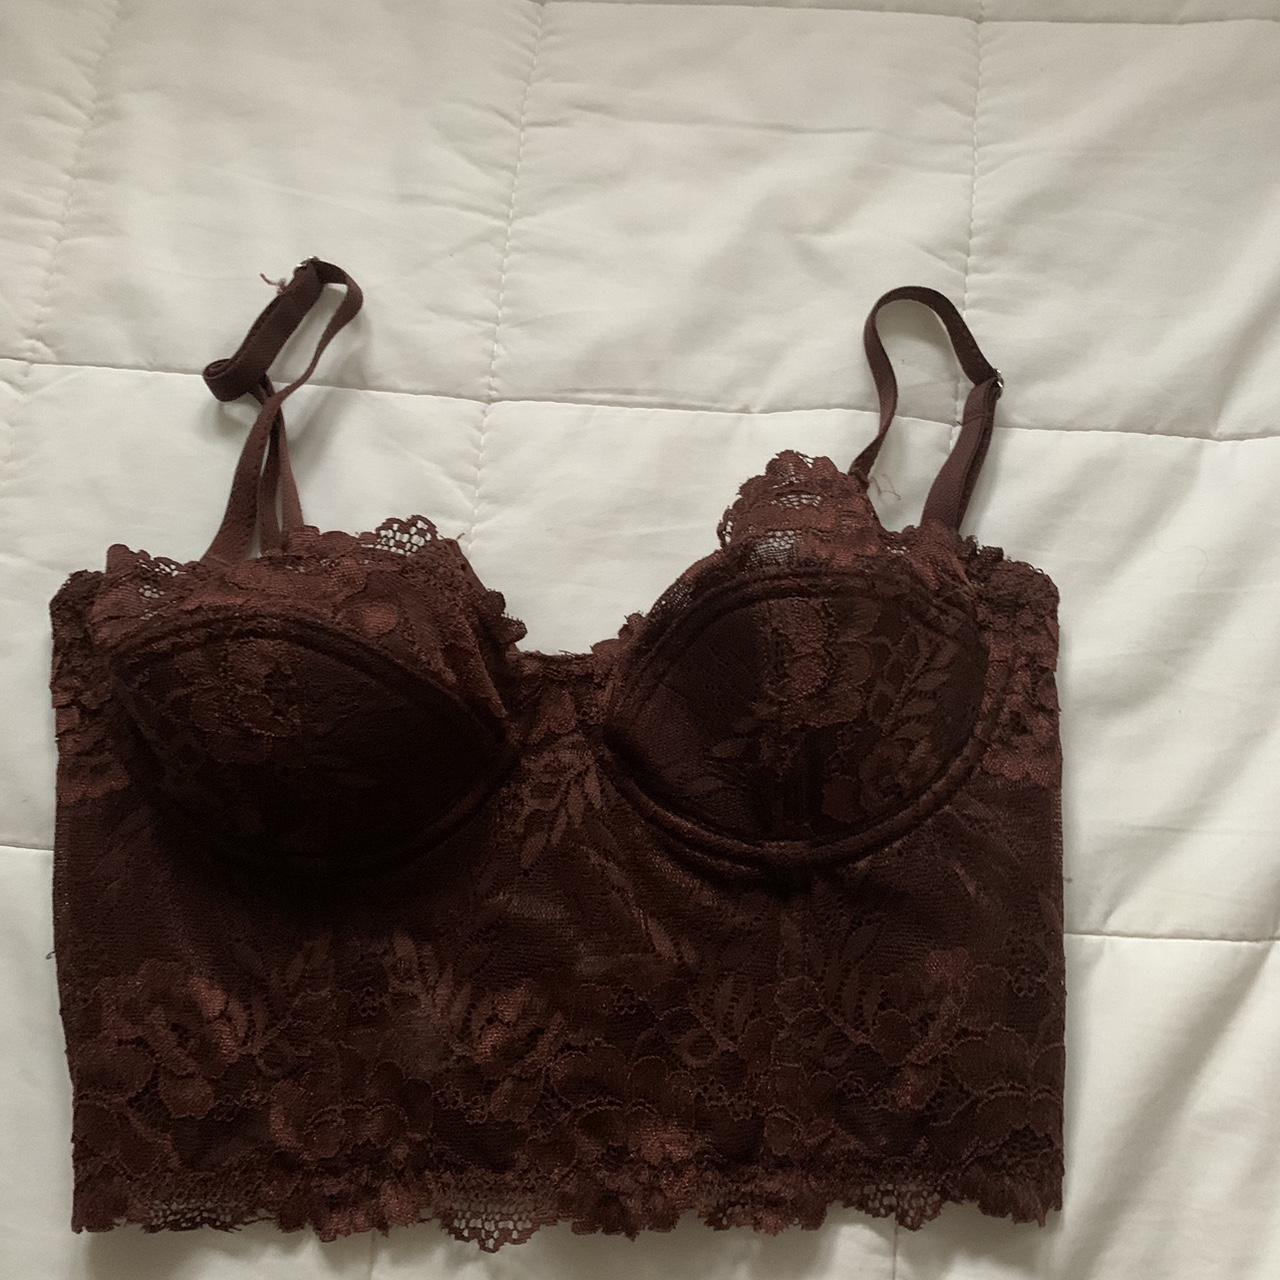 Urban Outfitters Women's Burgundy and Brown Corset | Depop